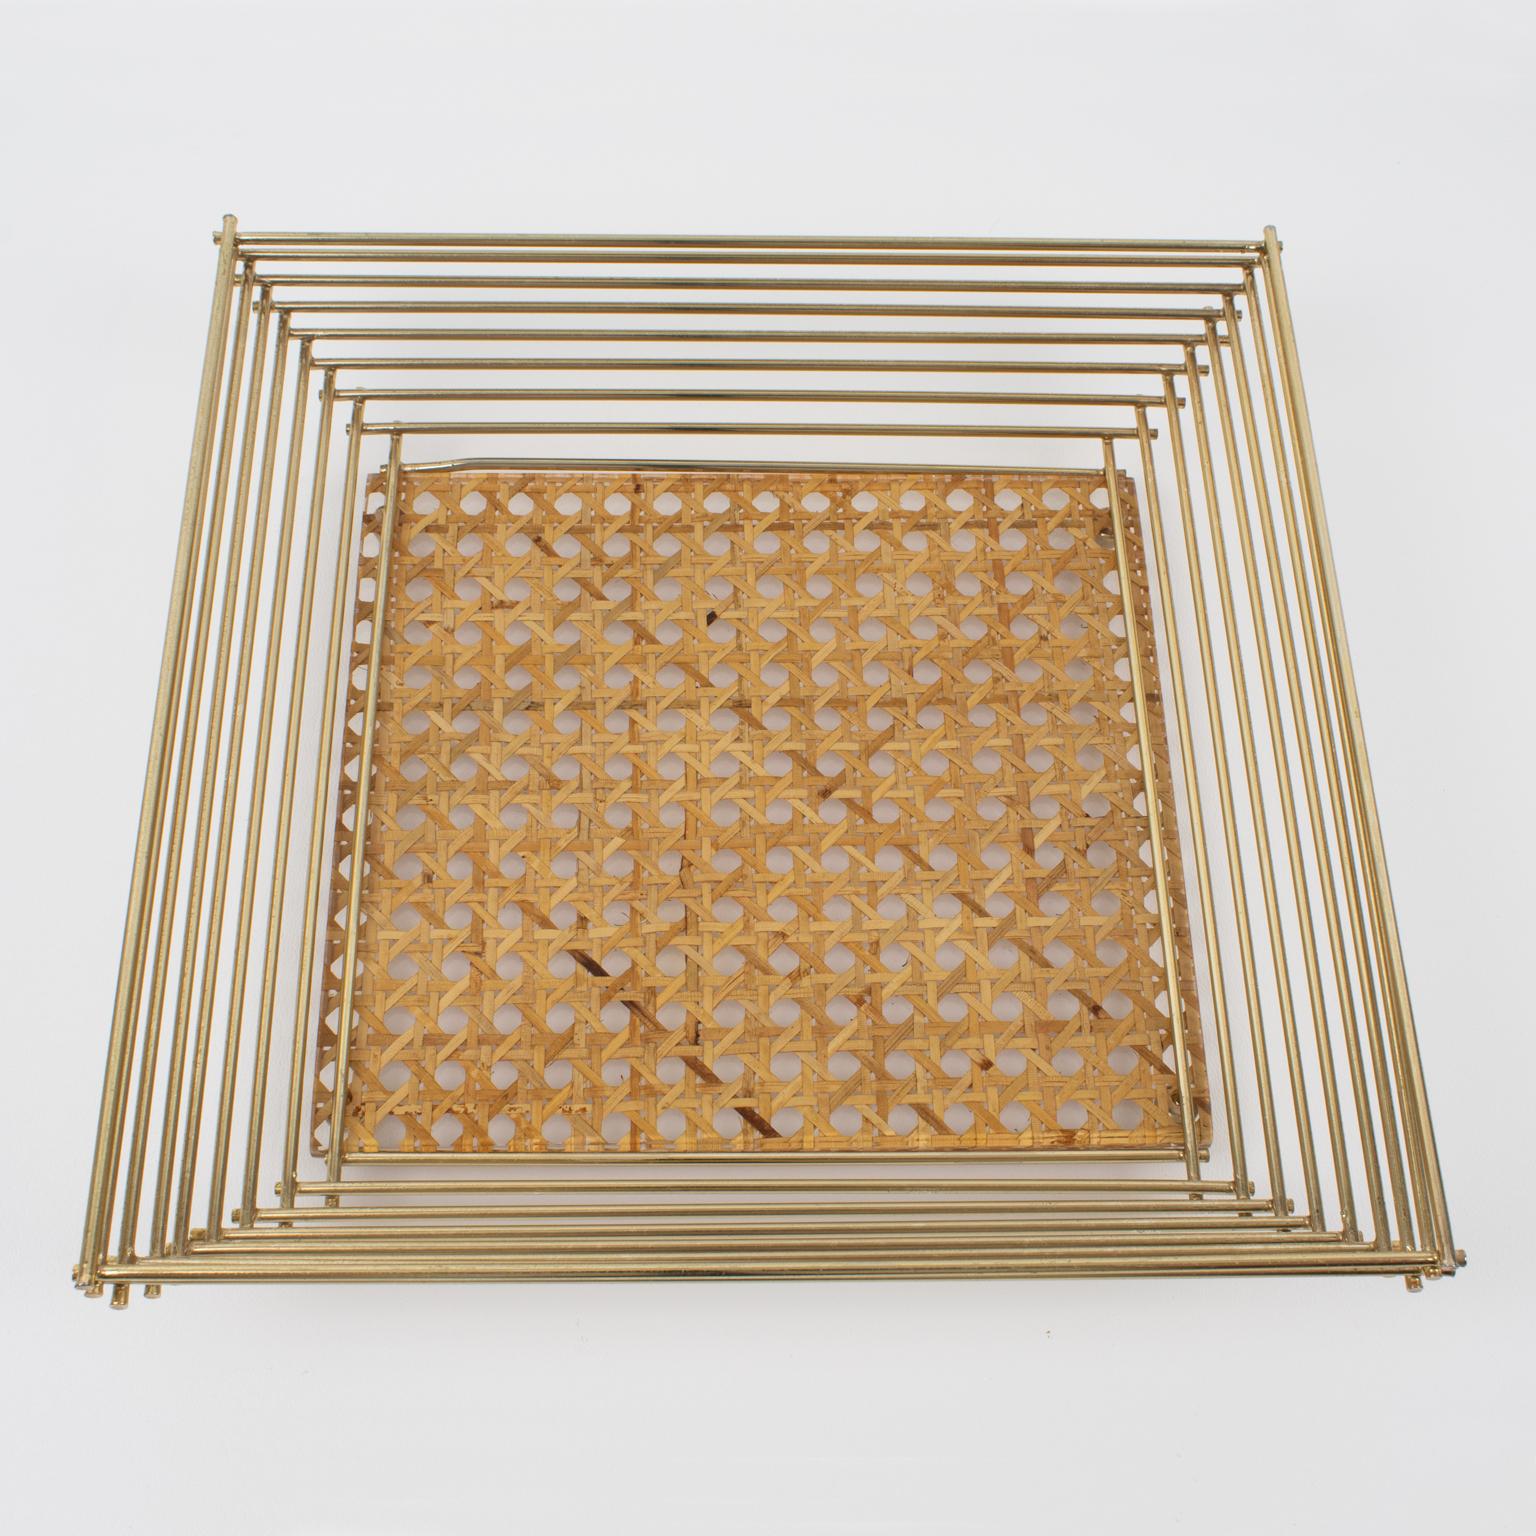 Late 20th Century Lucite, Rattan or Wicker and Brass Barware Serving Tray, Italy 1970s For Sale